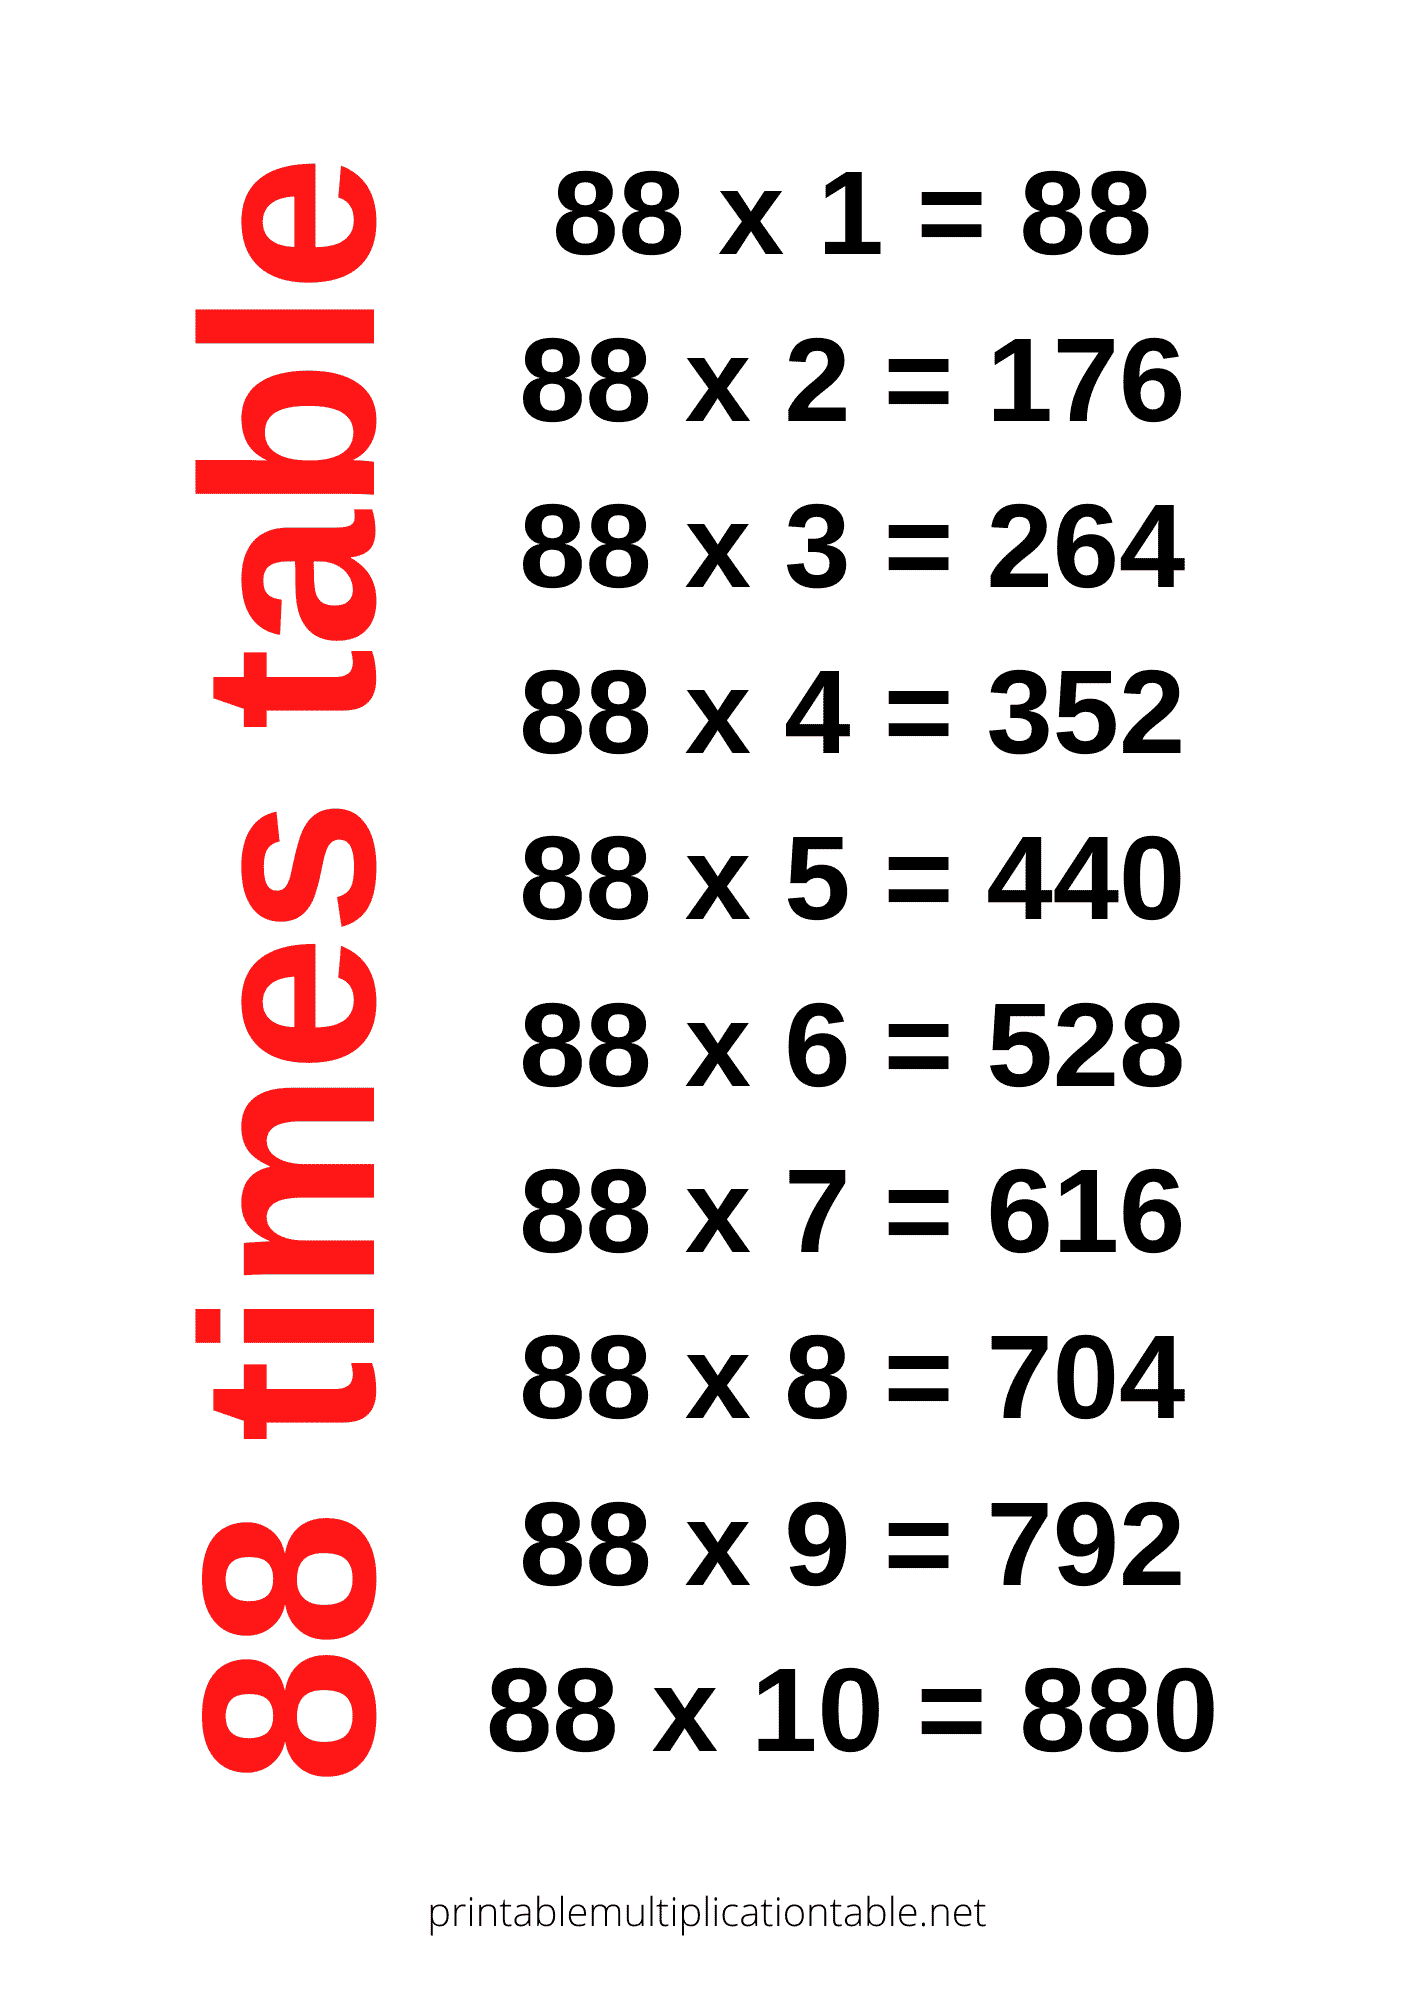 88 times table chart